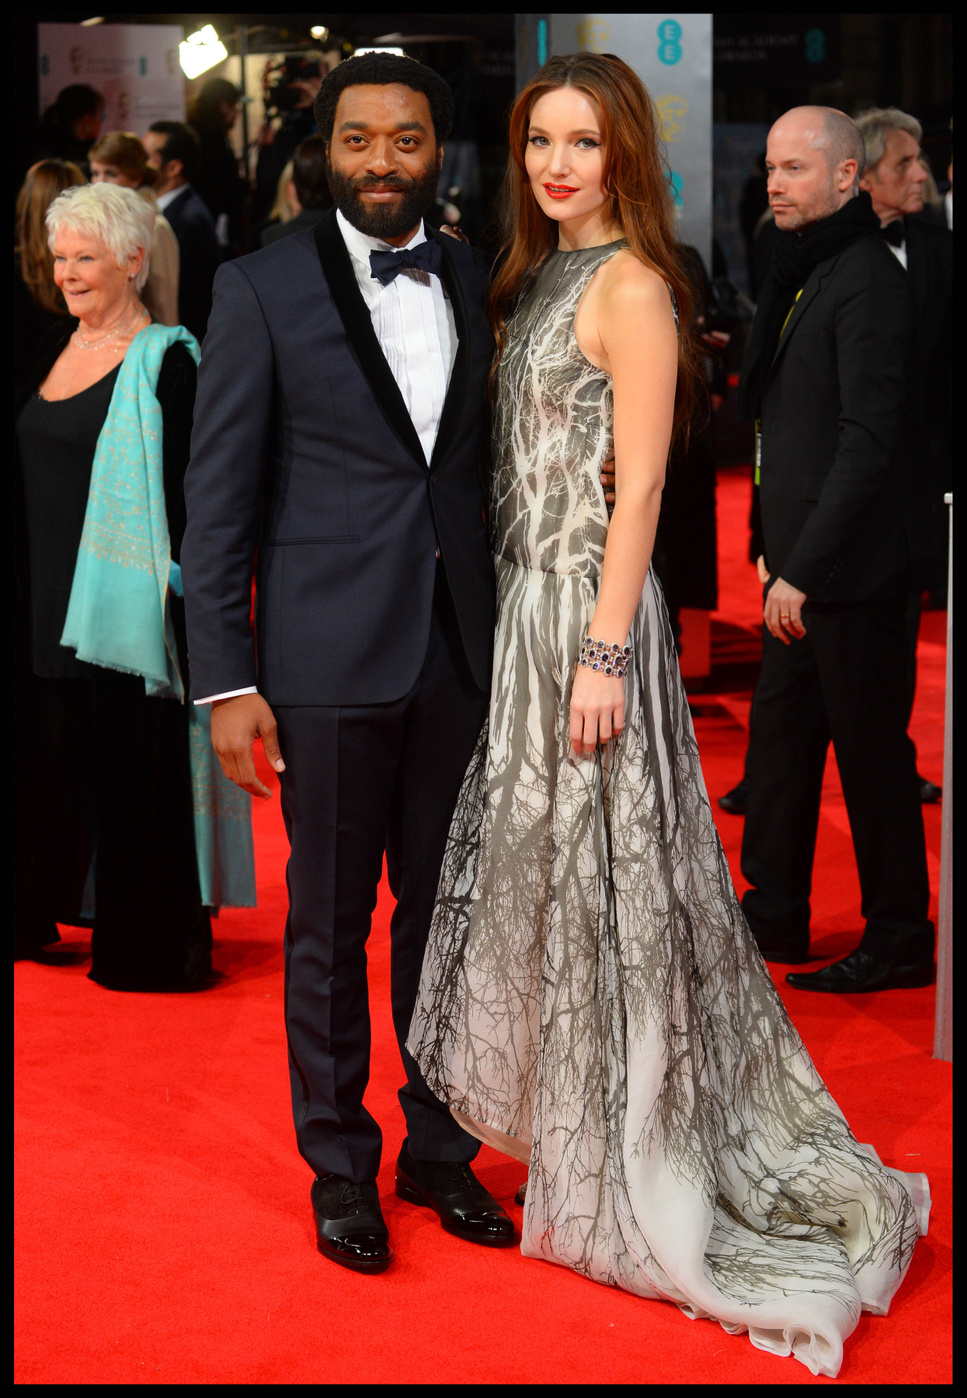 Chiwetel Ejiofor and Sari Mercer arrive for the EE British Academy Film Awards 2014 (BAFTA) at The Royal Opera House, Covent Garden in London